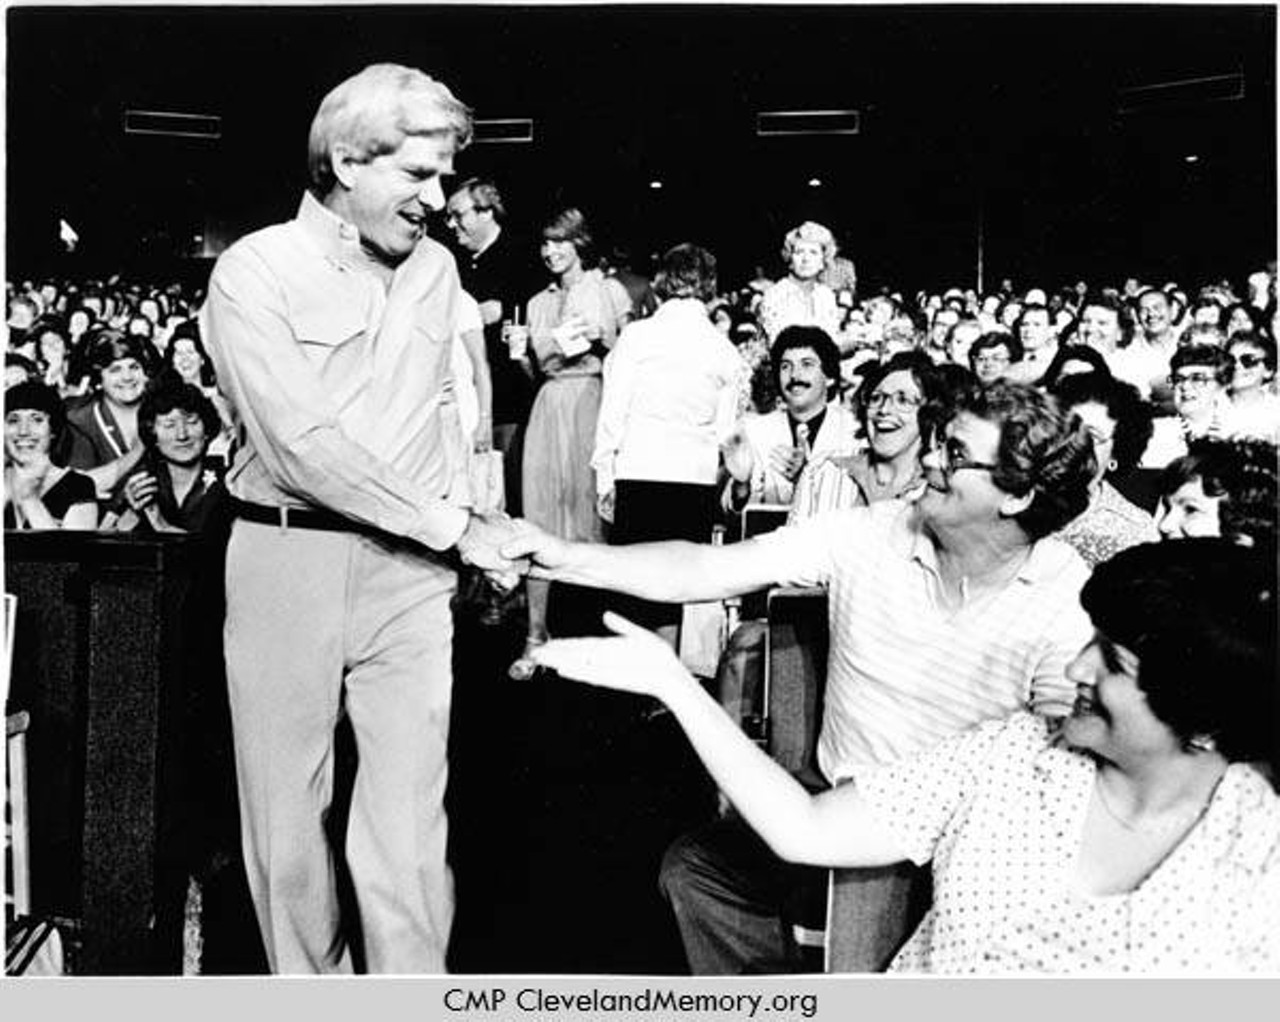 Phil Donahue greeting audience at his show, 1980